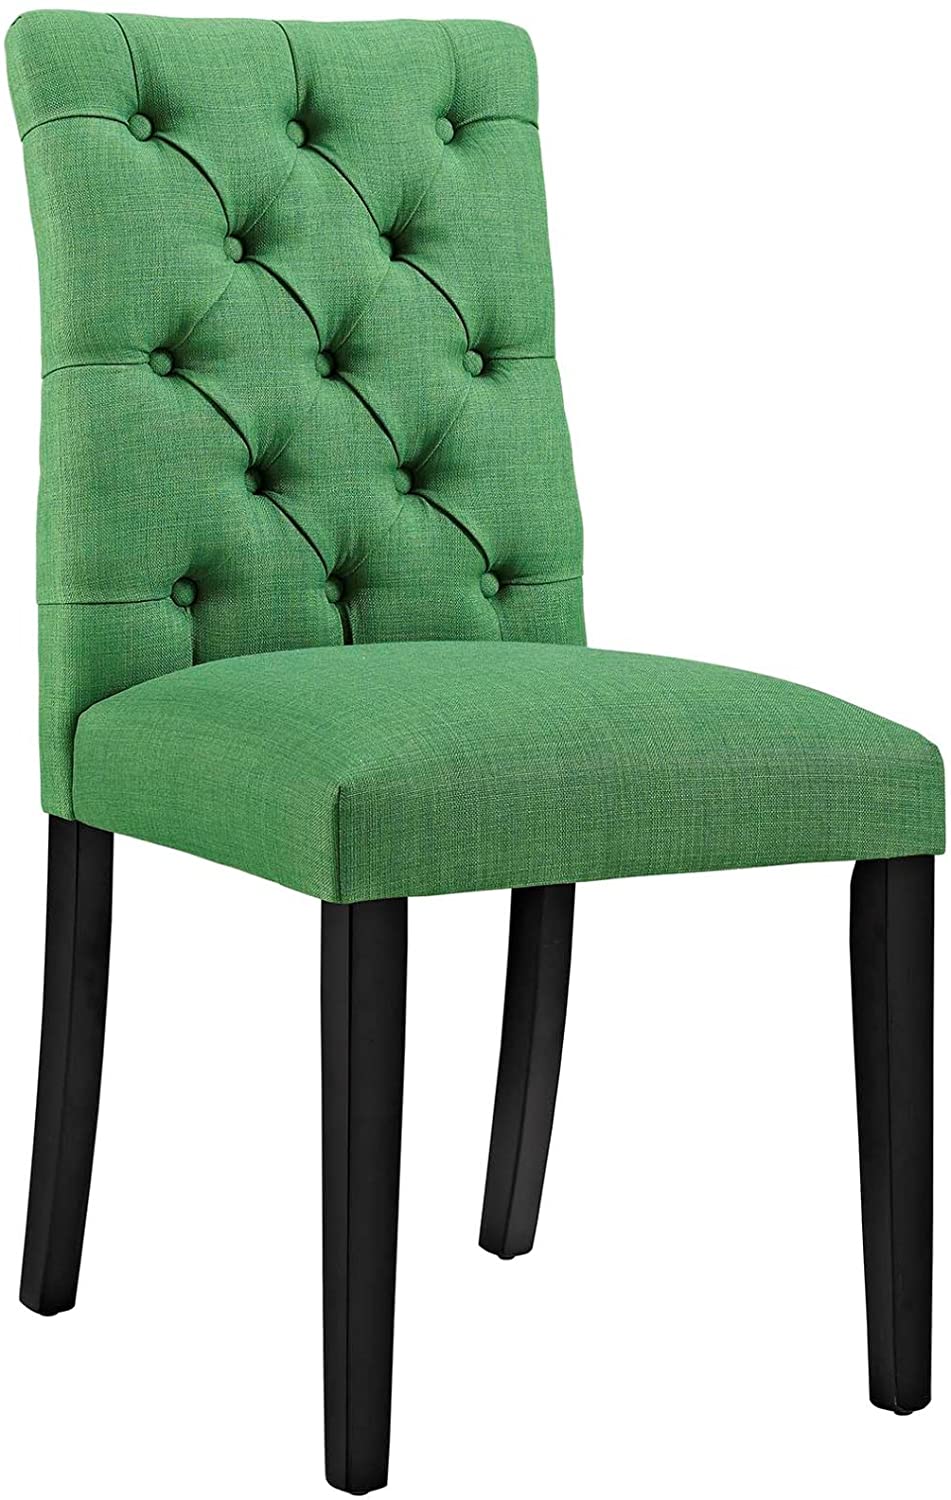 B076DH9DR9 Modern Contemporary Urban Design Kitchen Room Dining Chair, Green, Fabric